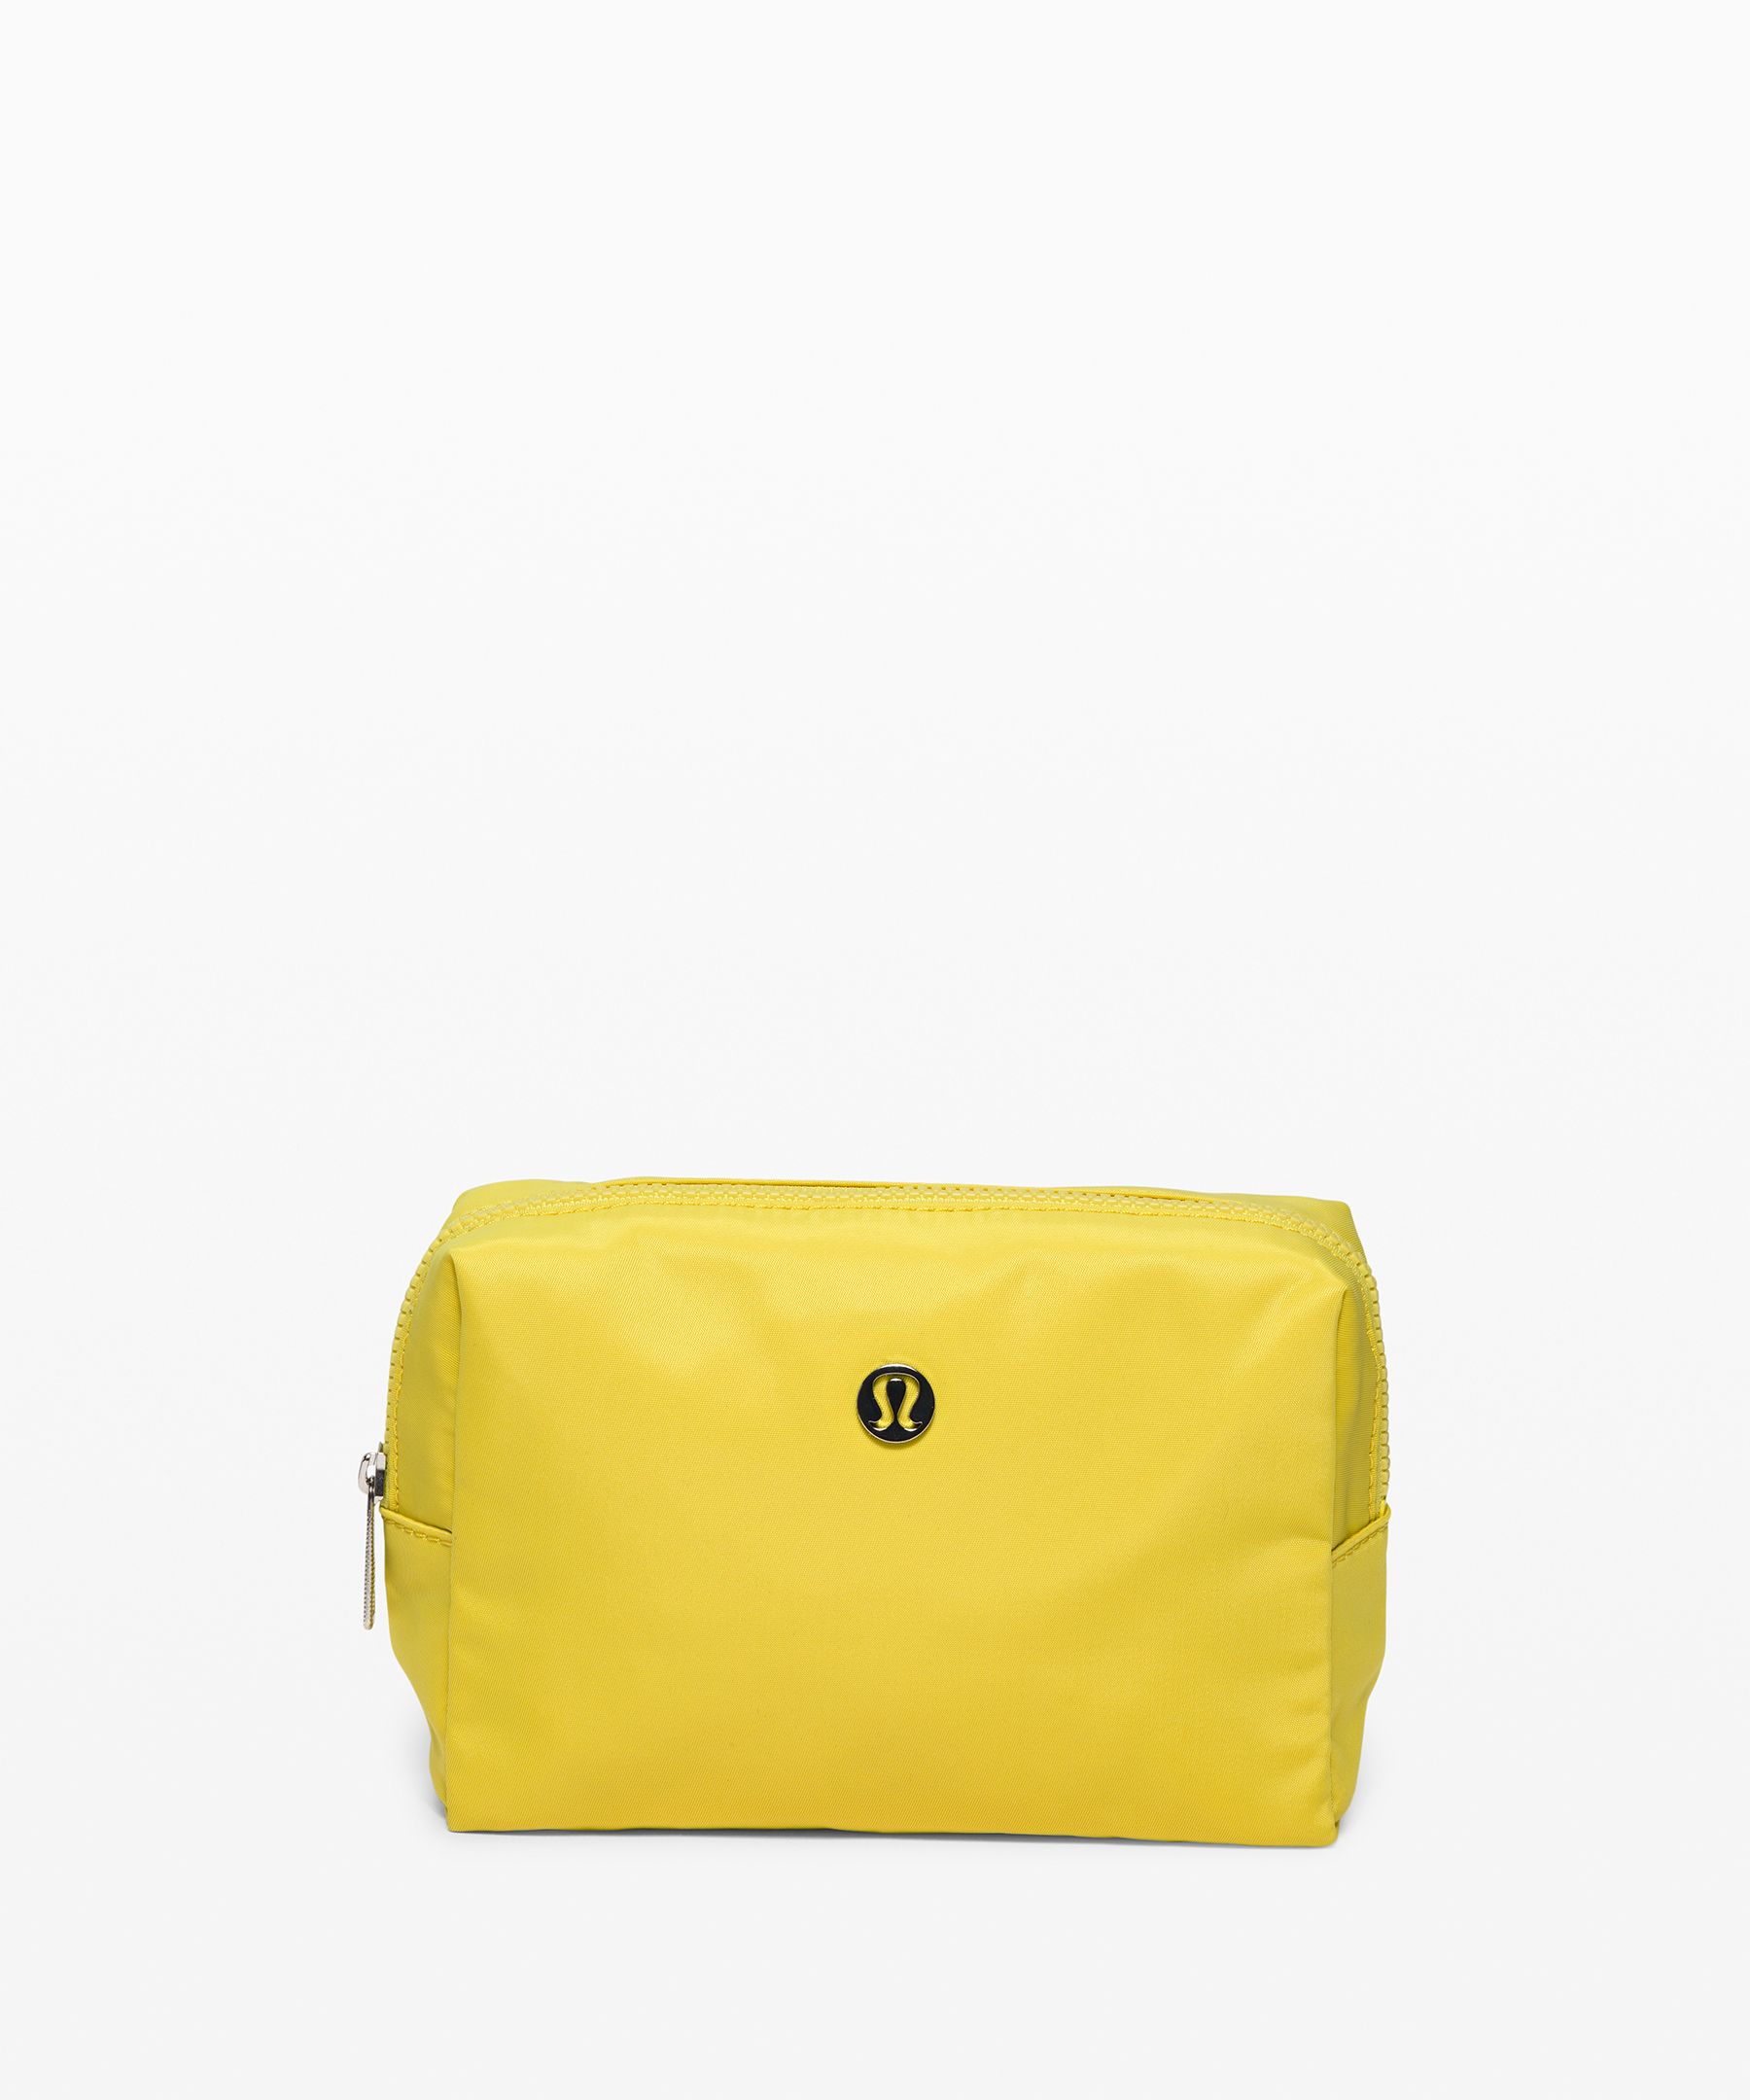 Lululemon All Your Small Things Pouch *2l Mini In Soleil